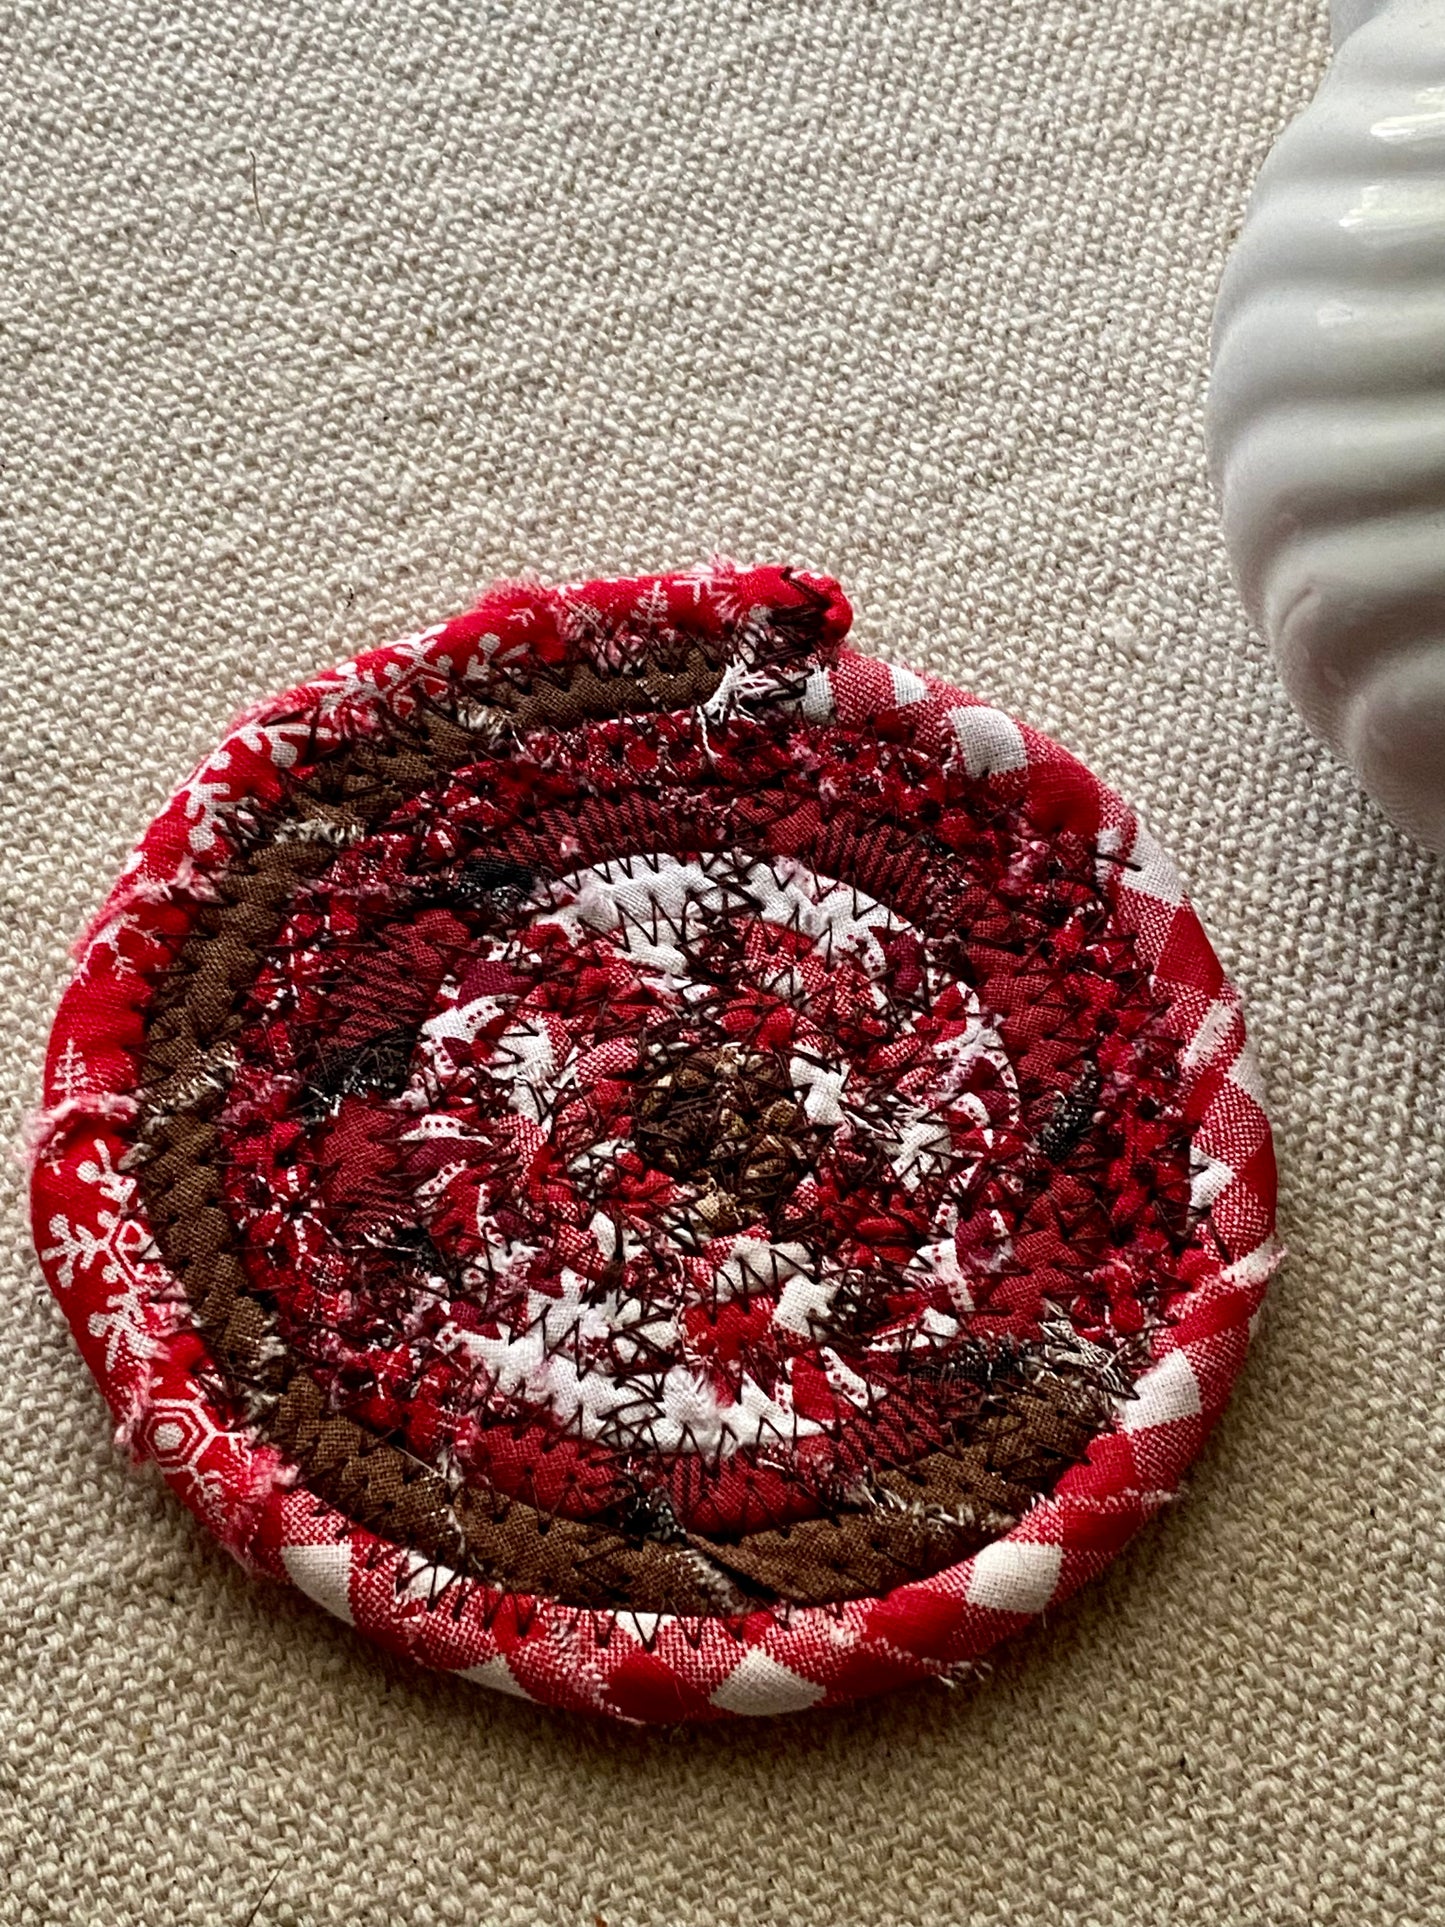 Set of Two Coasters - Fall